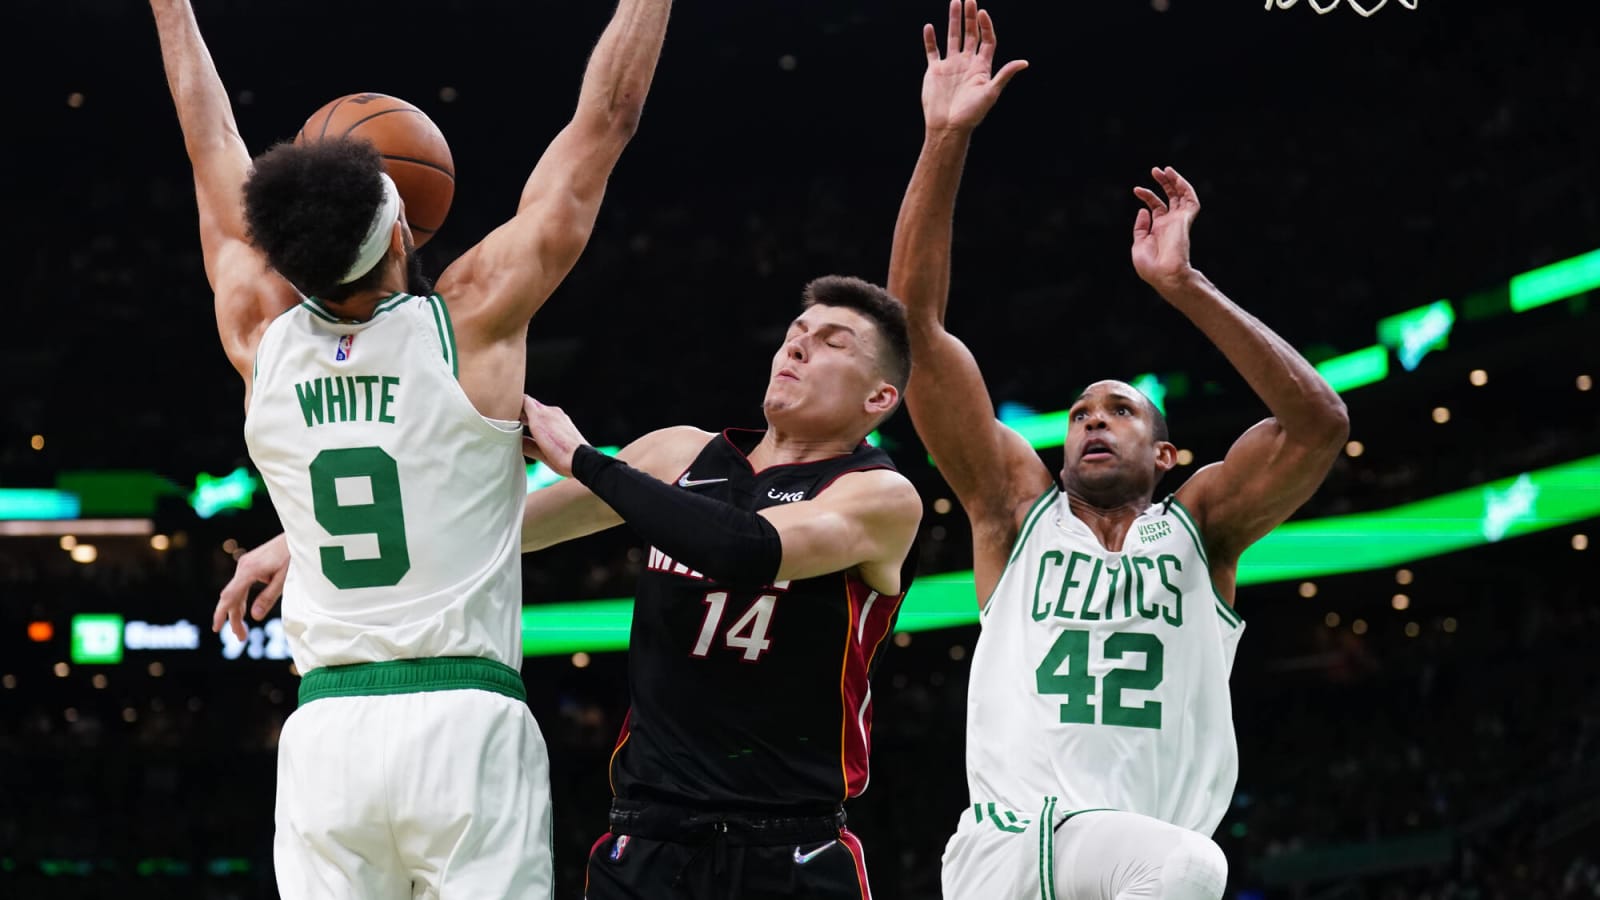 Expect Celtics to cover, even series with Heat